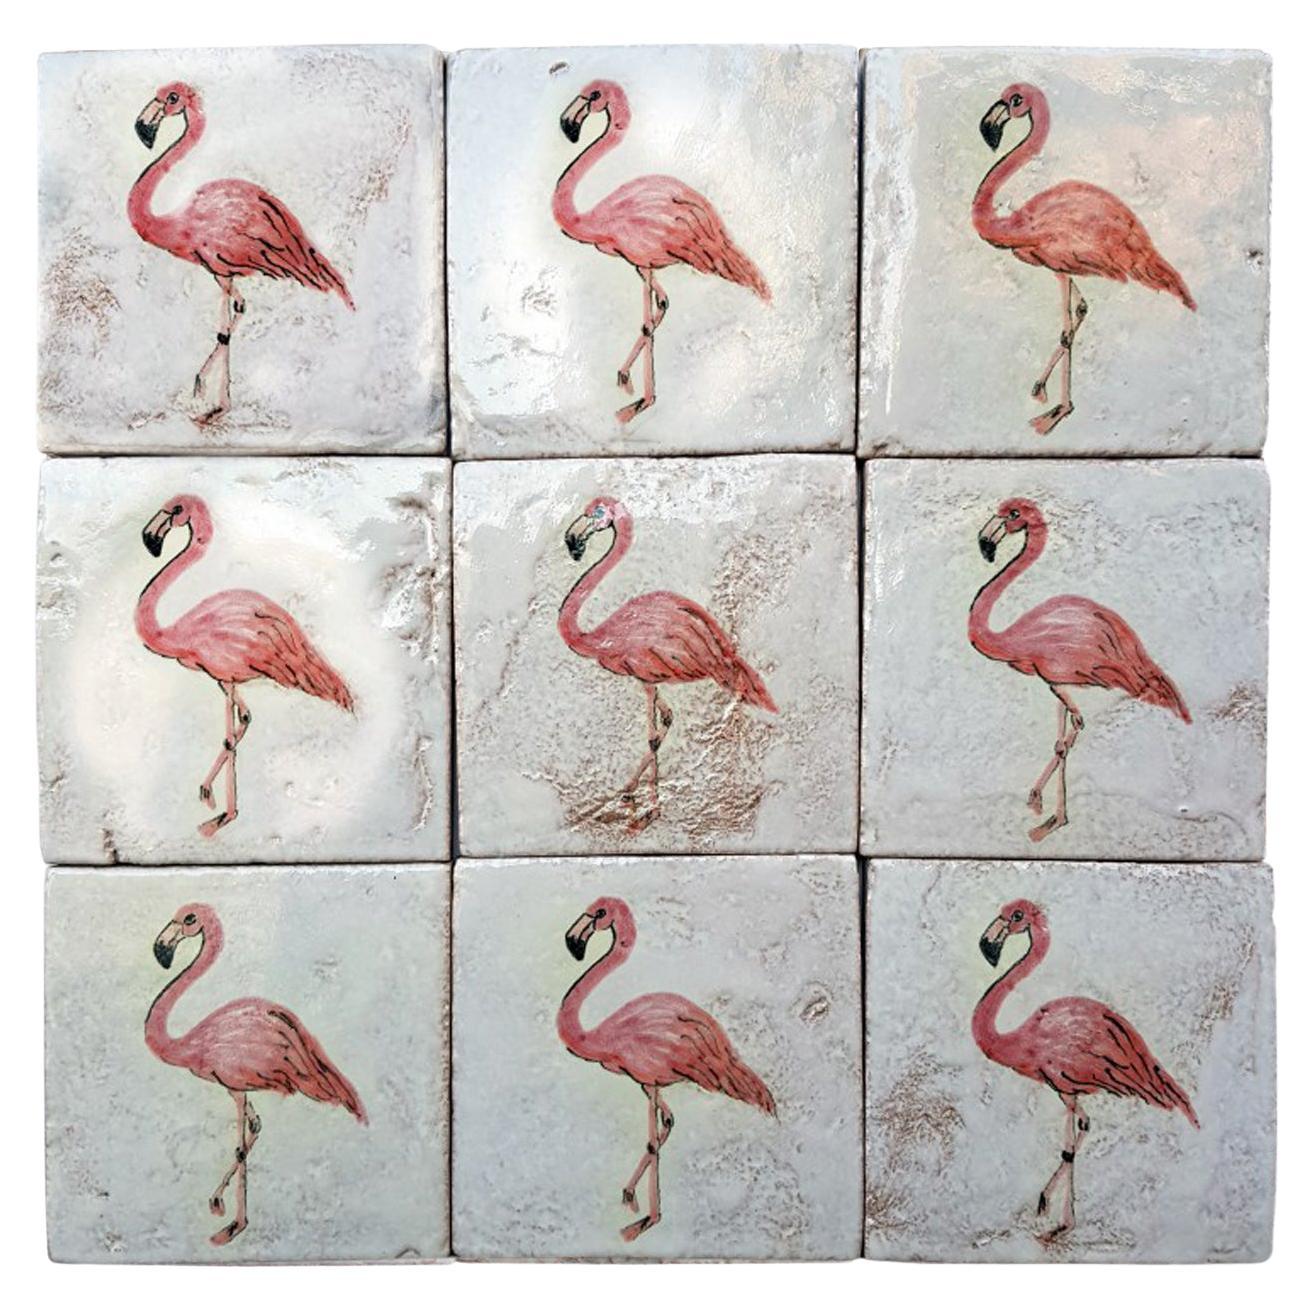 Gorgeous handpainted tiles with 3 different images of a pink flamingo (Phoenicopterus roseus Pallas). The tiles are hand painted and handmade in Italy. Designed by Guido Frilli. These tiles would be charming displayed on easels, framed or